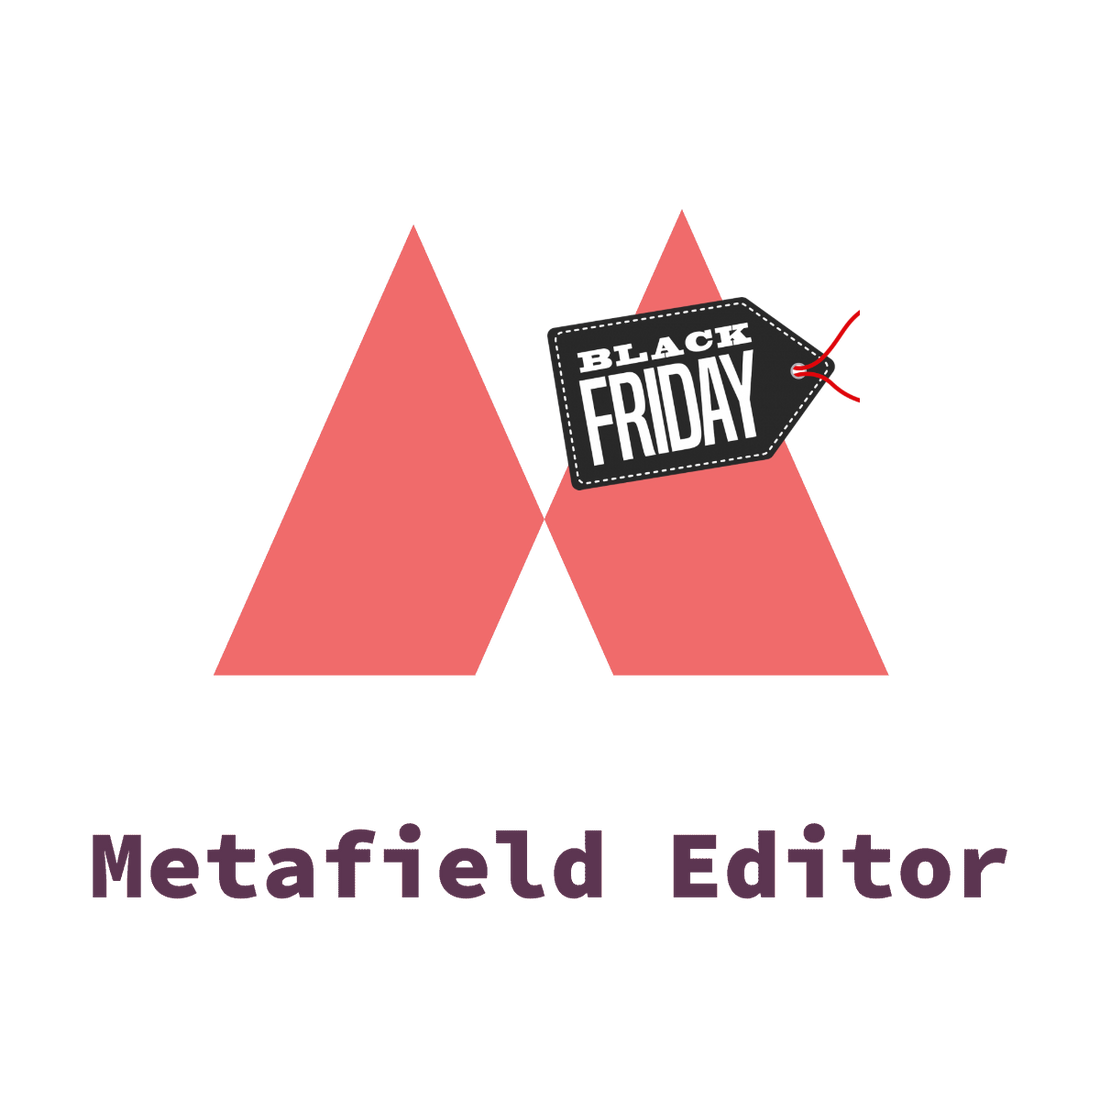 Boost your sales this Black Friday with Metafield Editor